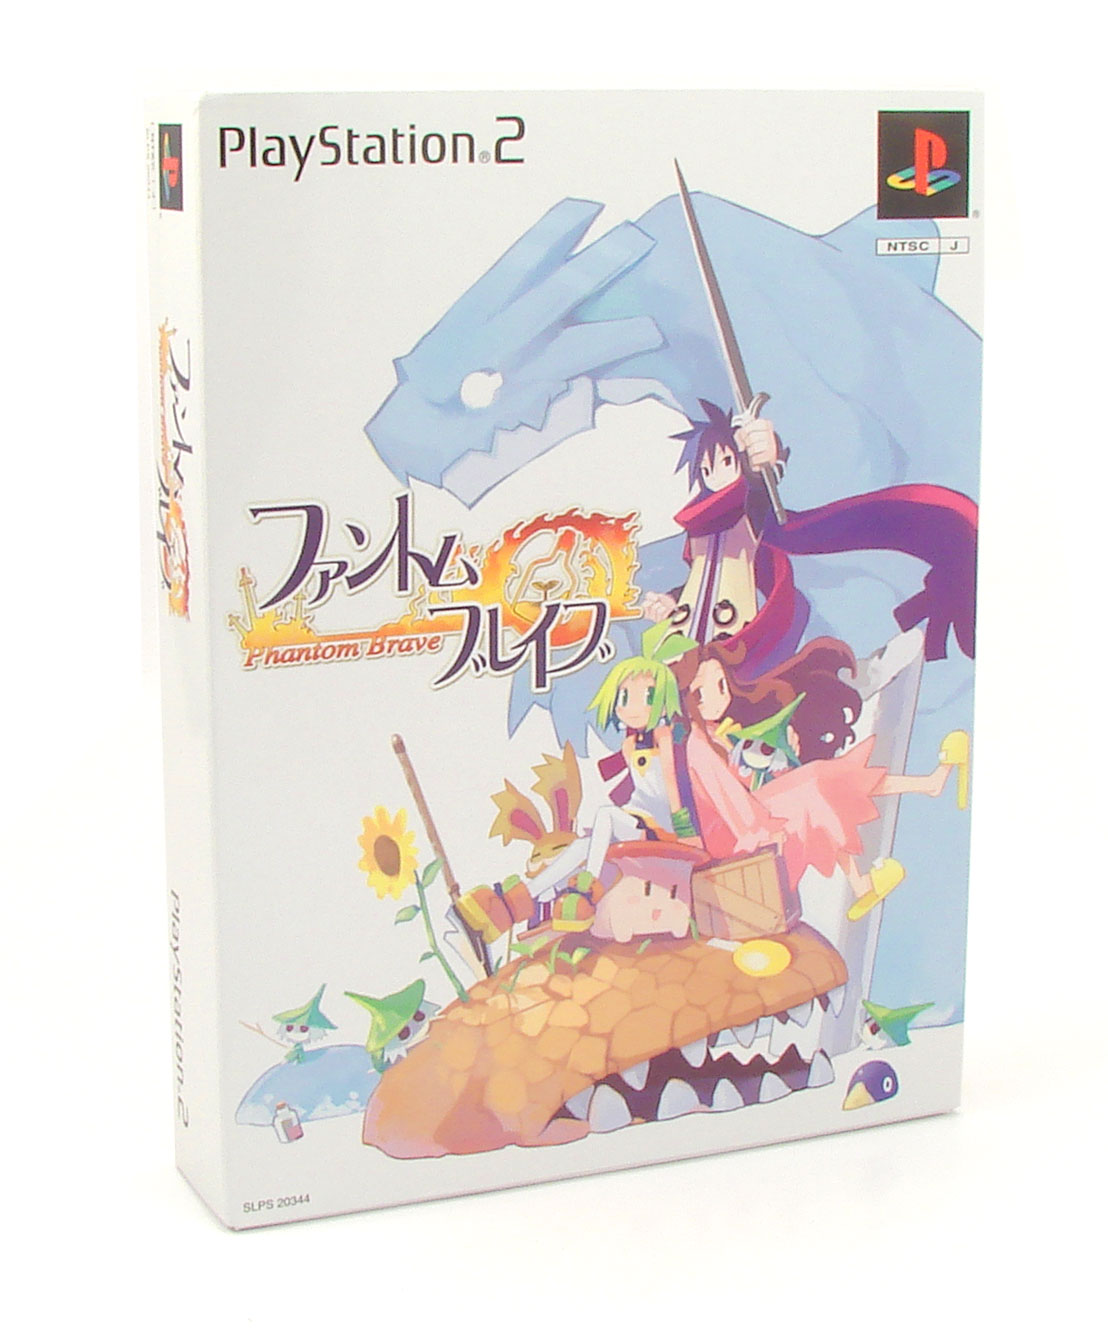 Phantom Brave [Limited Edition] for PlayStation 2